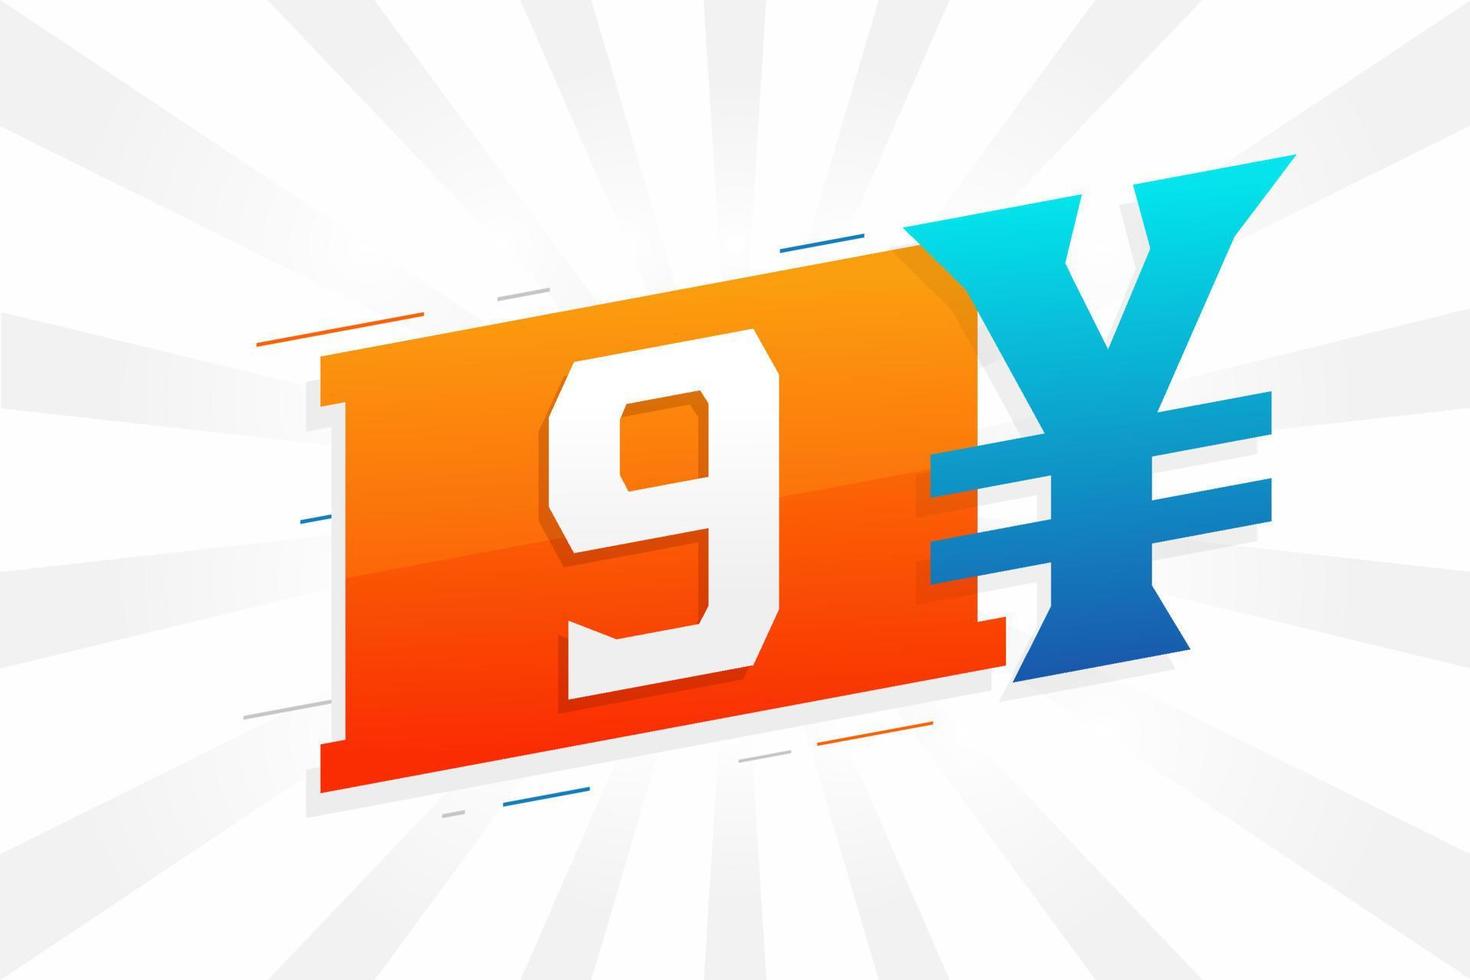 9 Yuan Chinese currency vector text symbol. 9 Yen Japanese currency Money stock vector